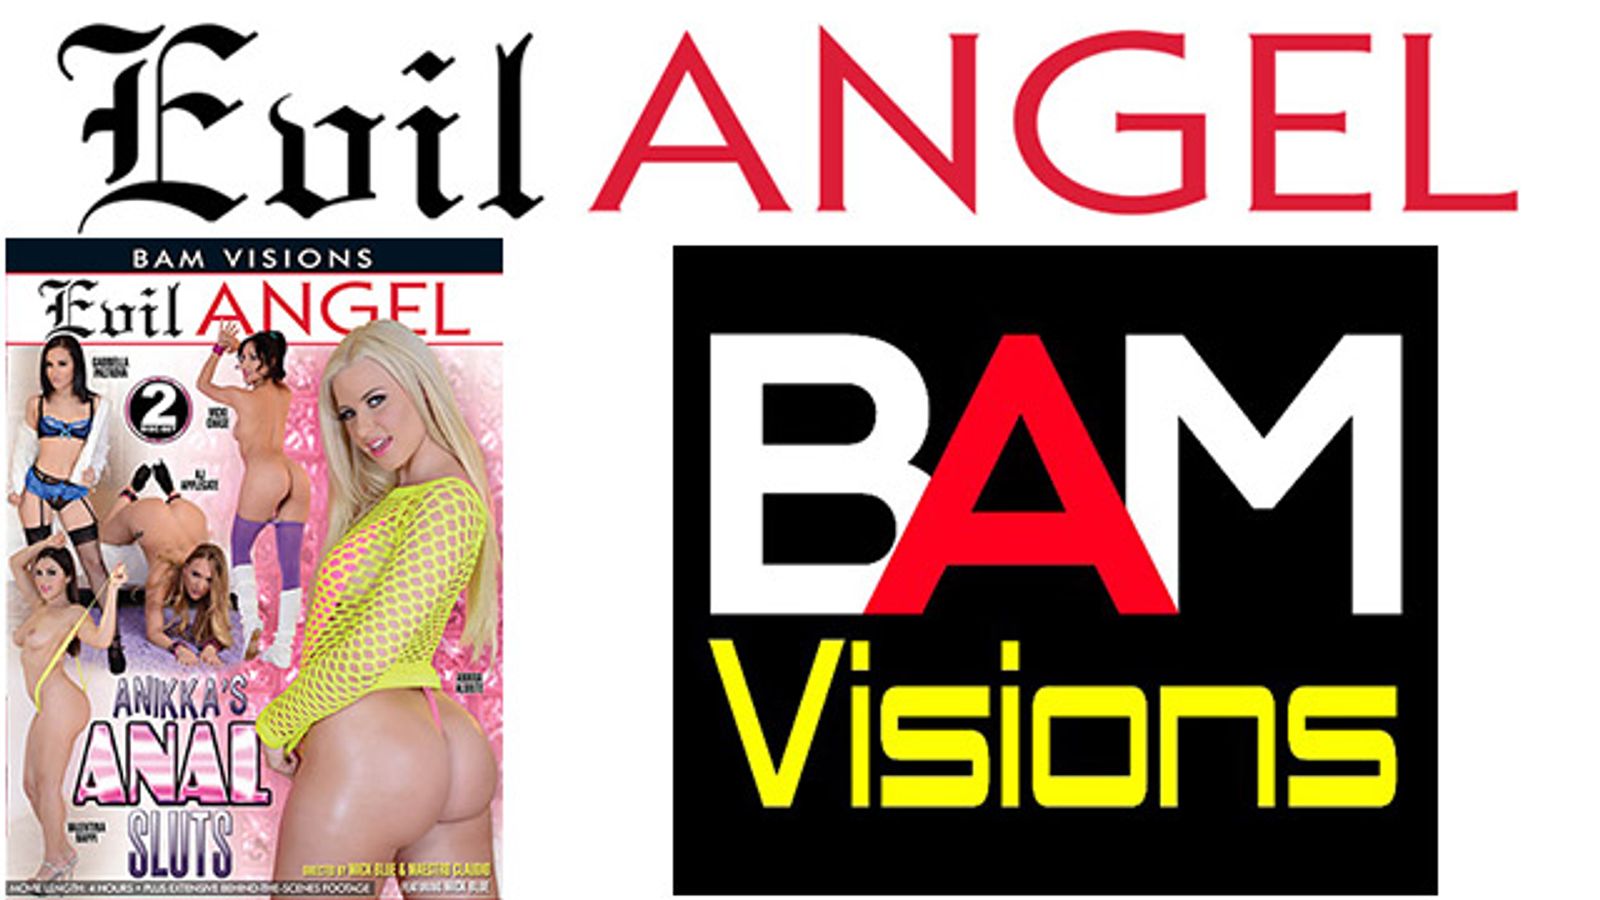 BAM Visions' ‘Anikka’s Anal Sluts’ Streets This Week